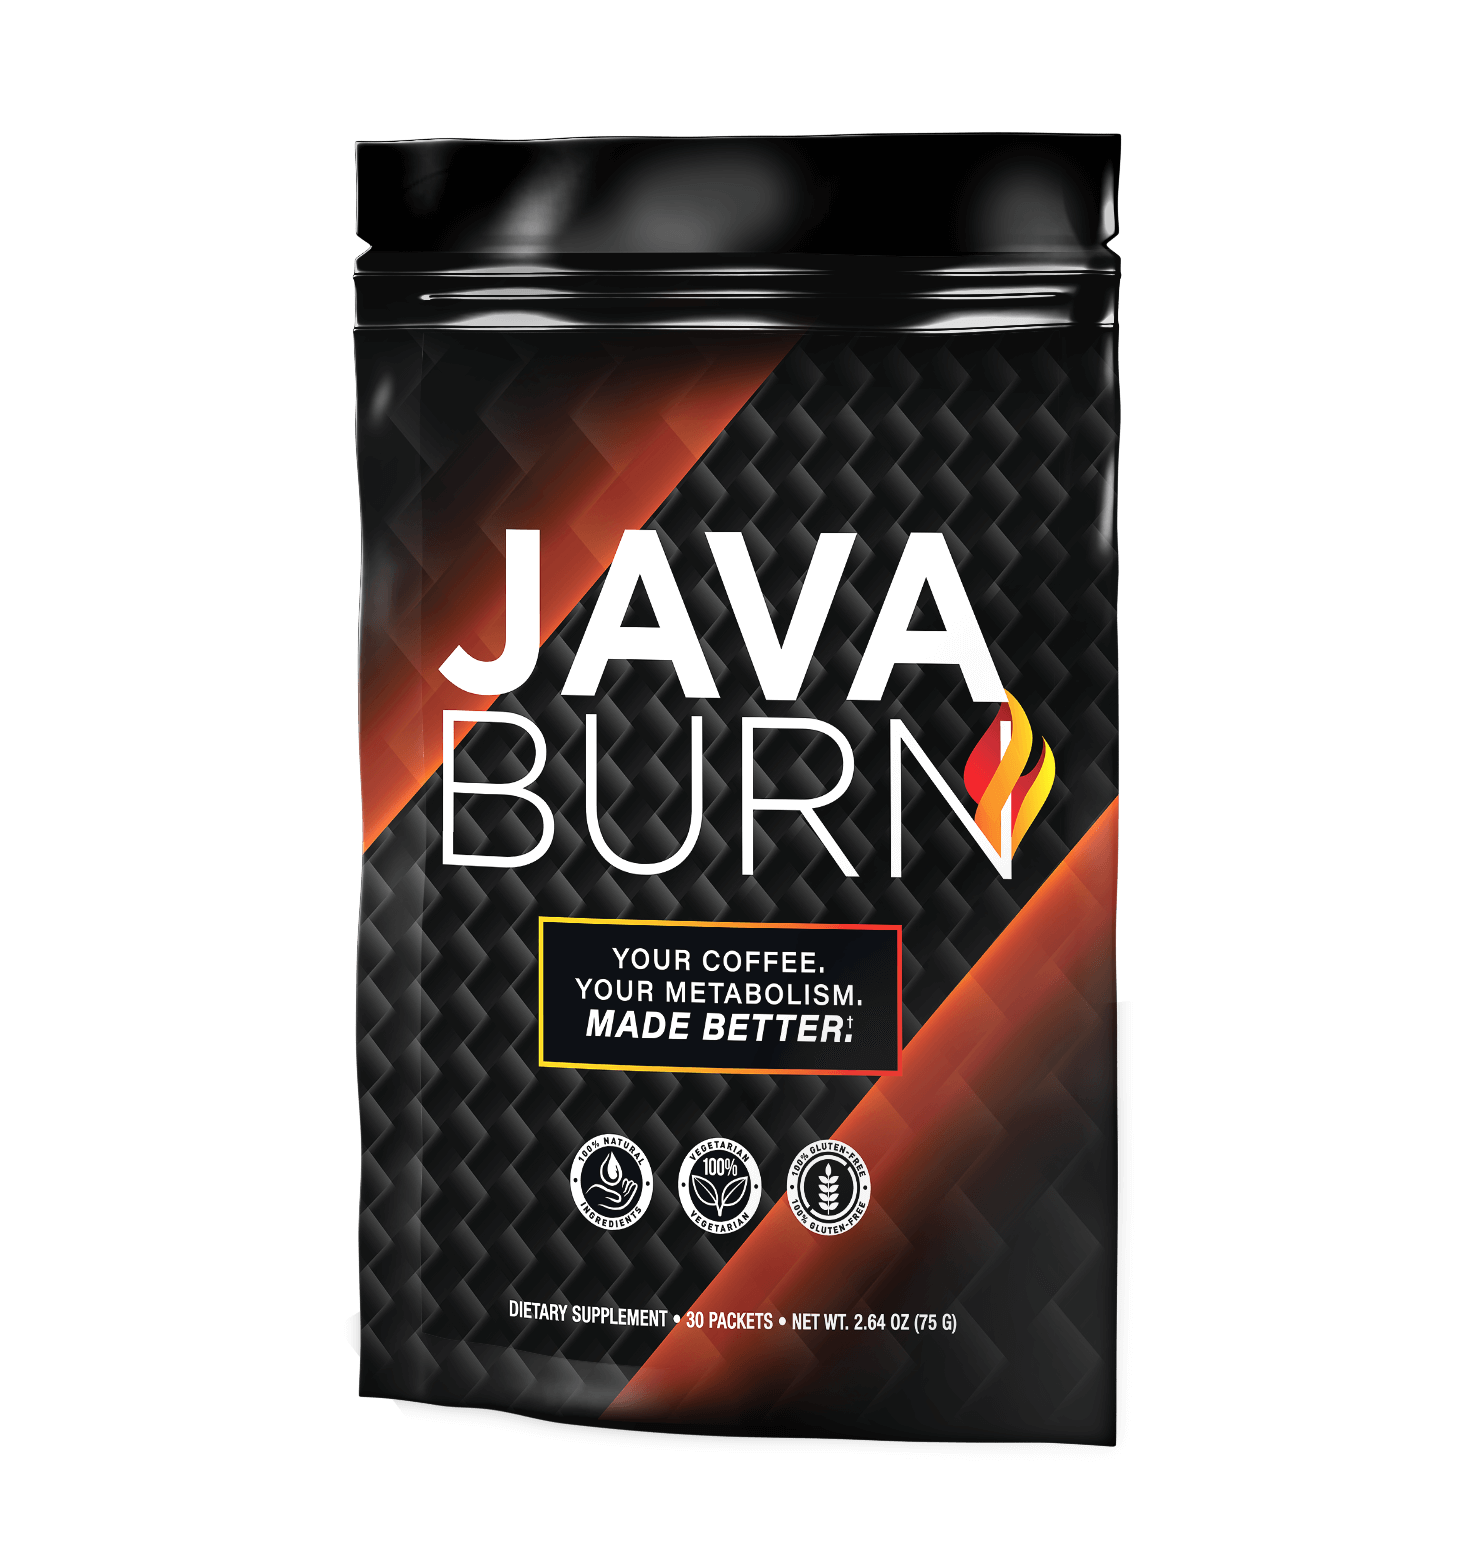 Image showing a single packet of Java Burn, a coffee supplement, featuring its packaging design and branding